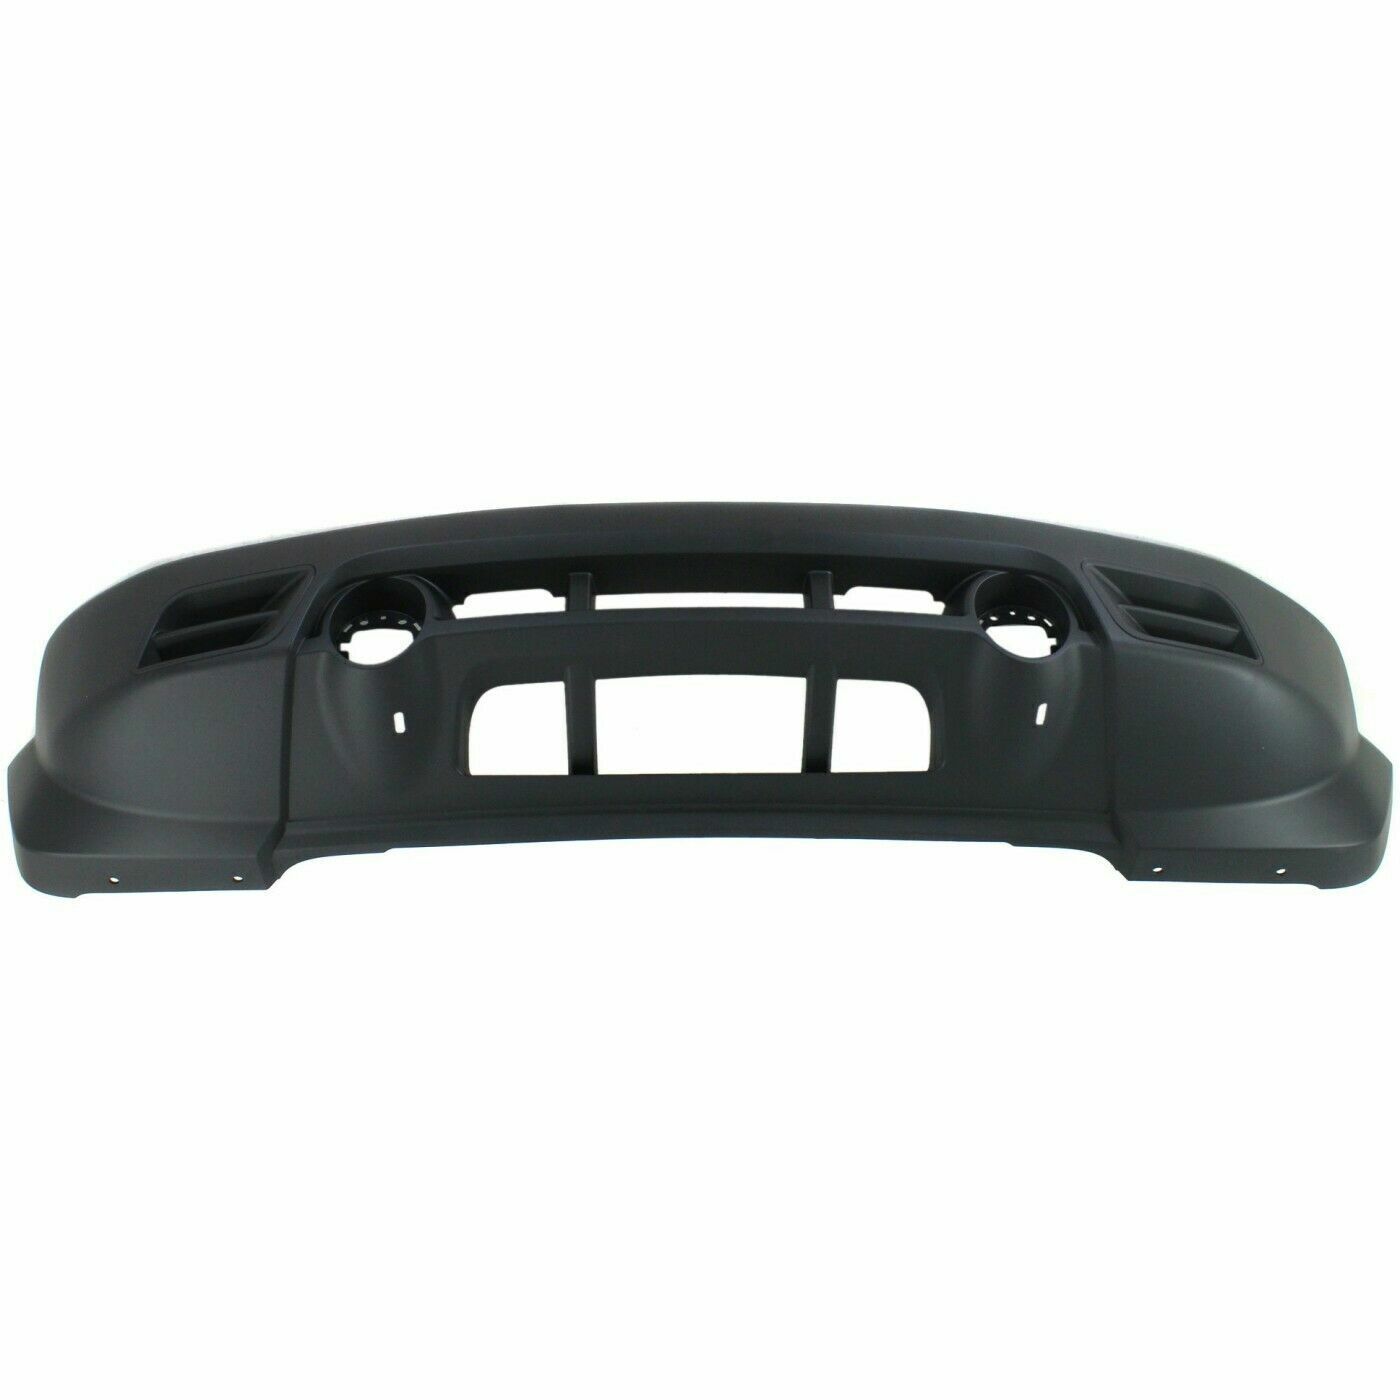 2011-2017 JEEP PATRIOT; Front Bumper Cover lower; w/o CHR Insert w/o Tow Hooks Painted to Match